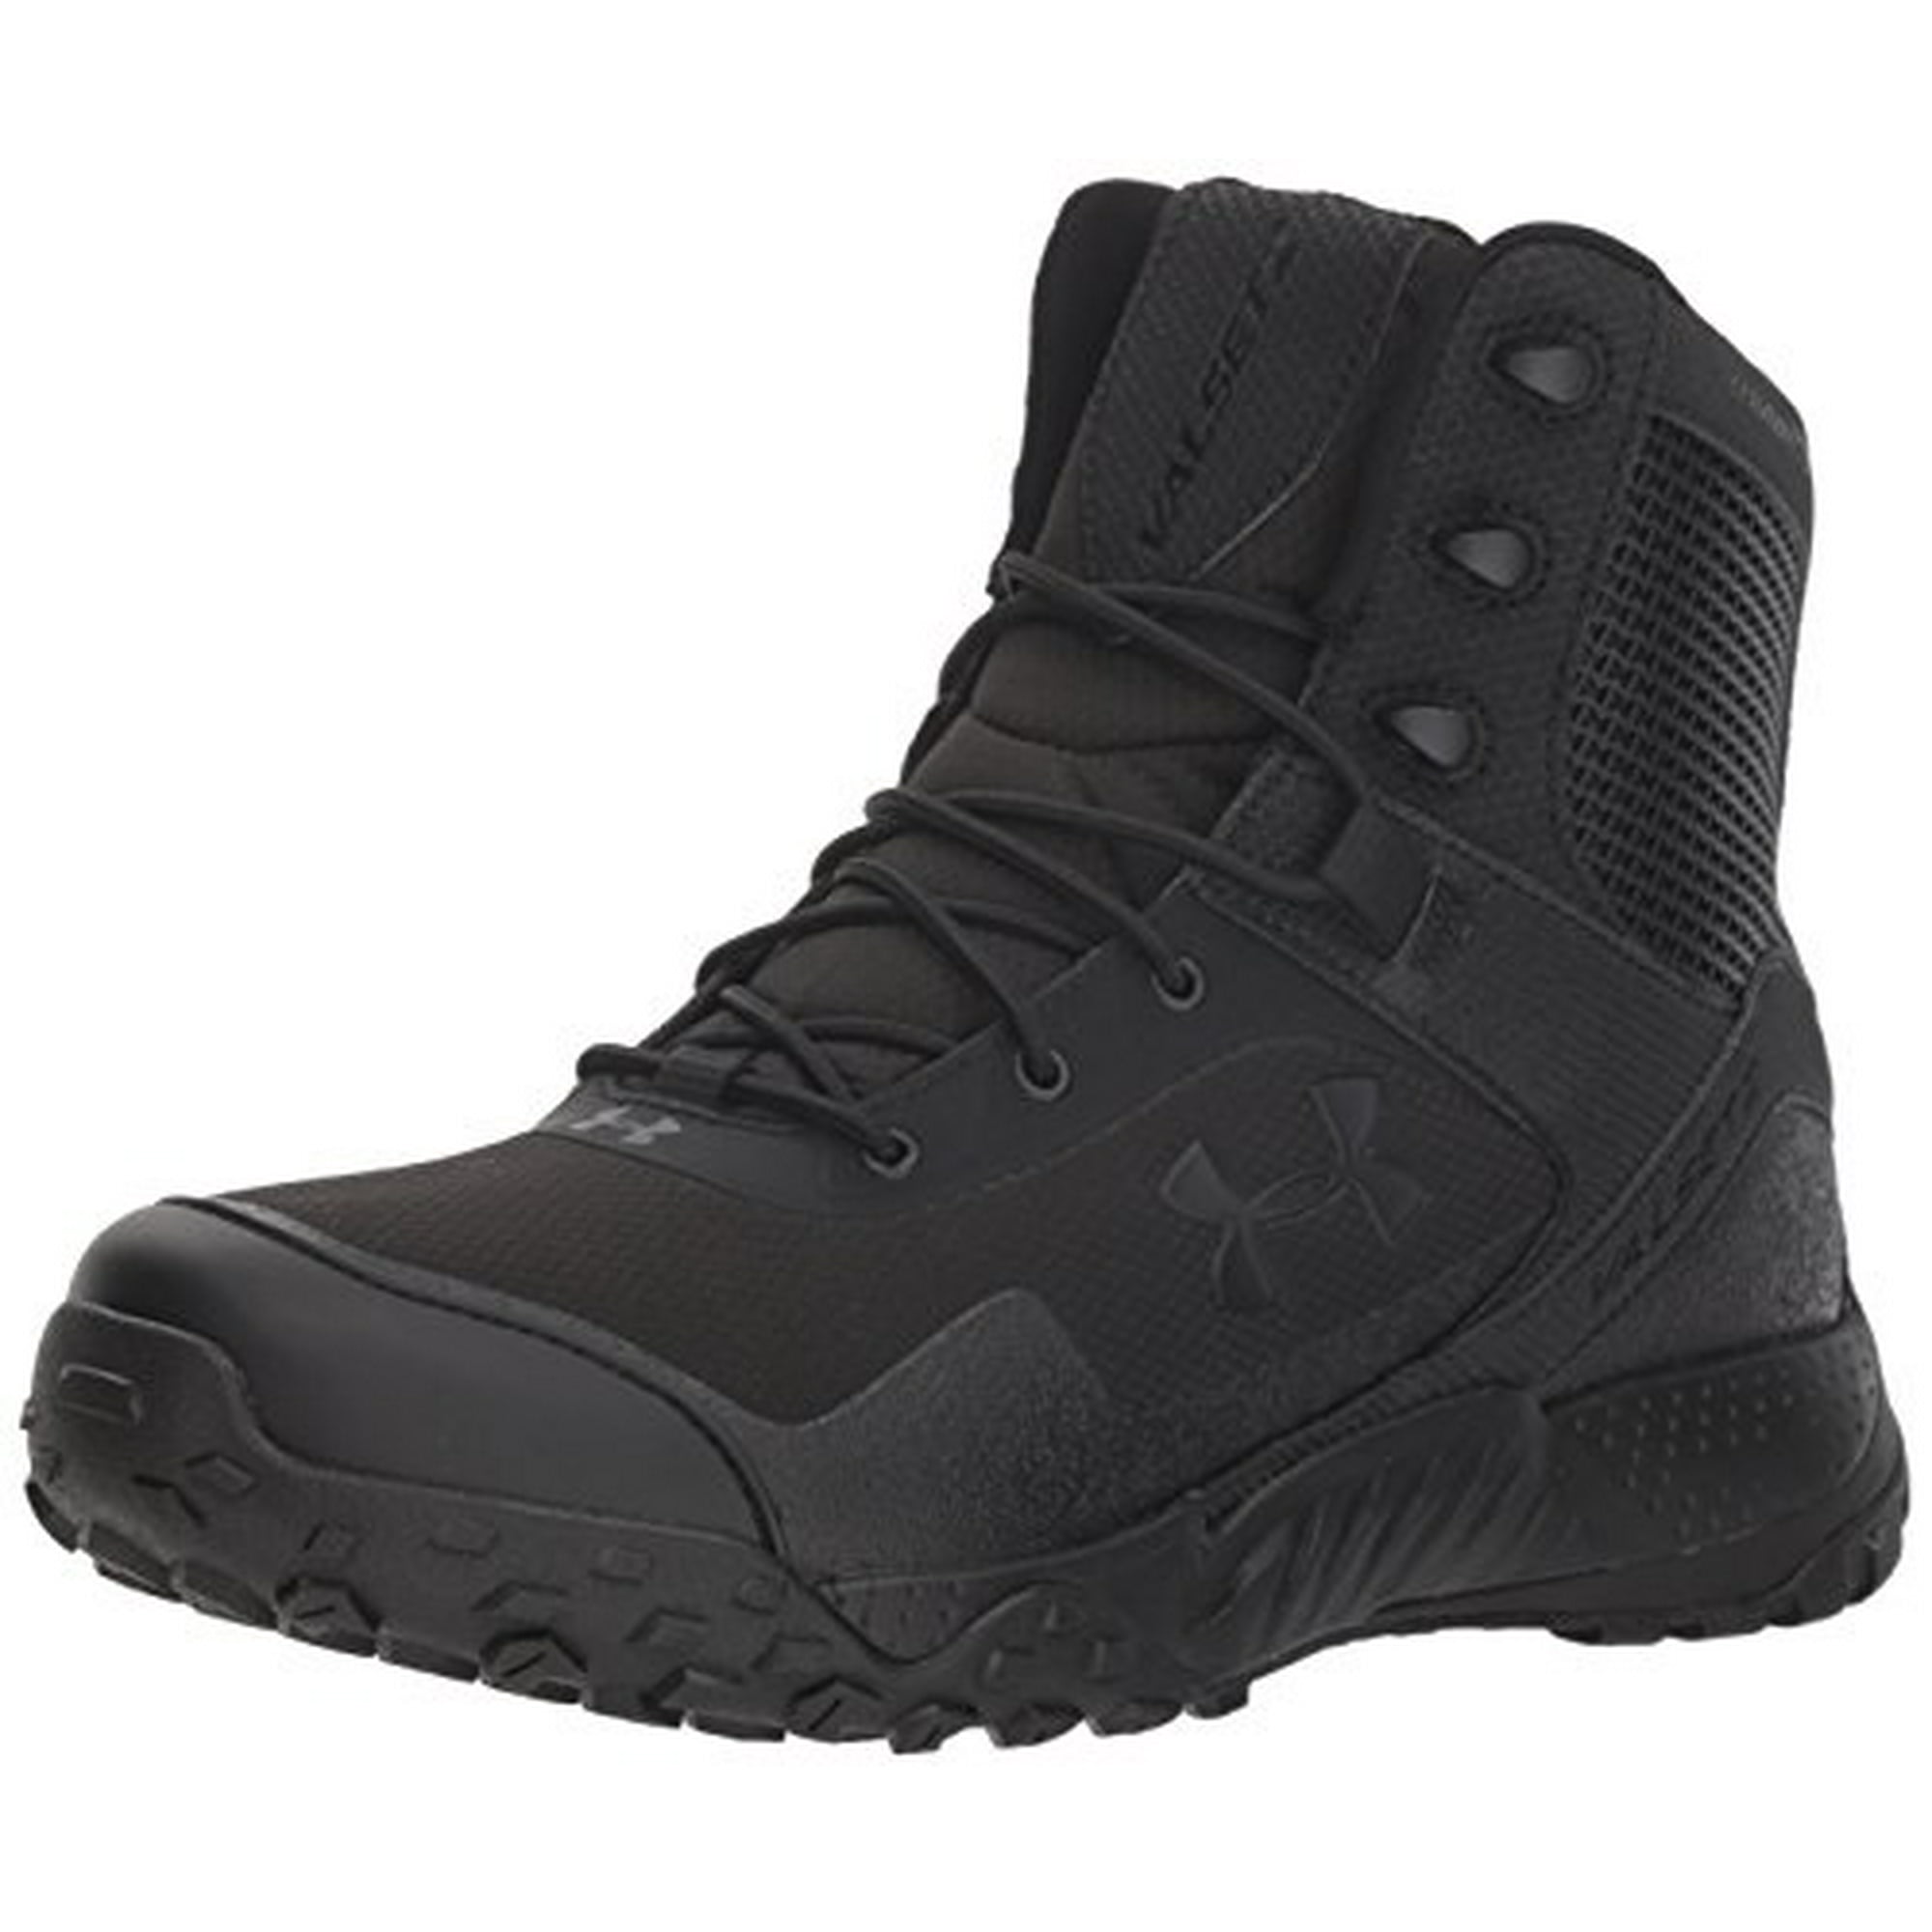 Under Valsetz Rts 1.5 Military and Tactical Boot | Walmart Canada